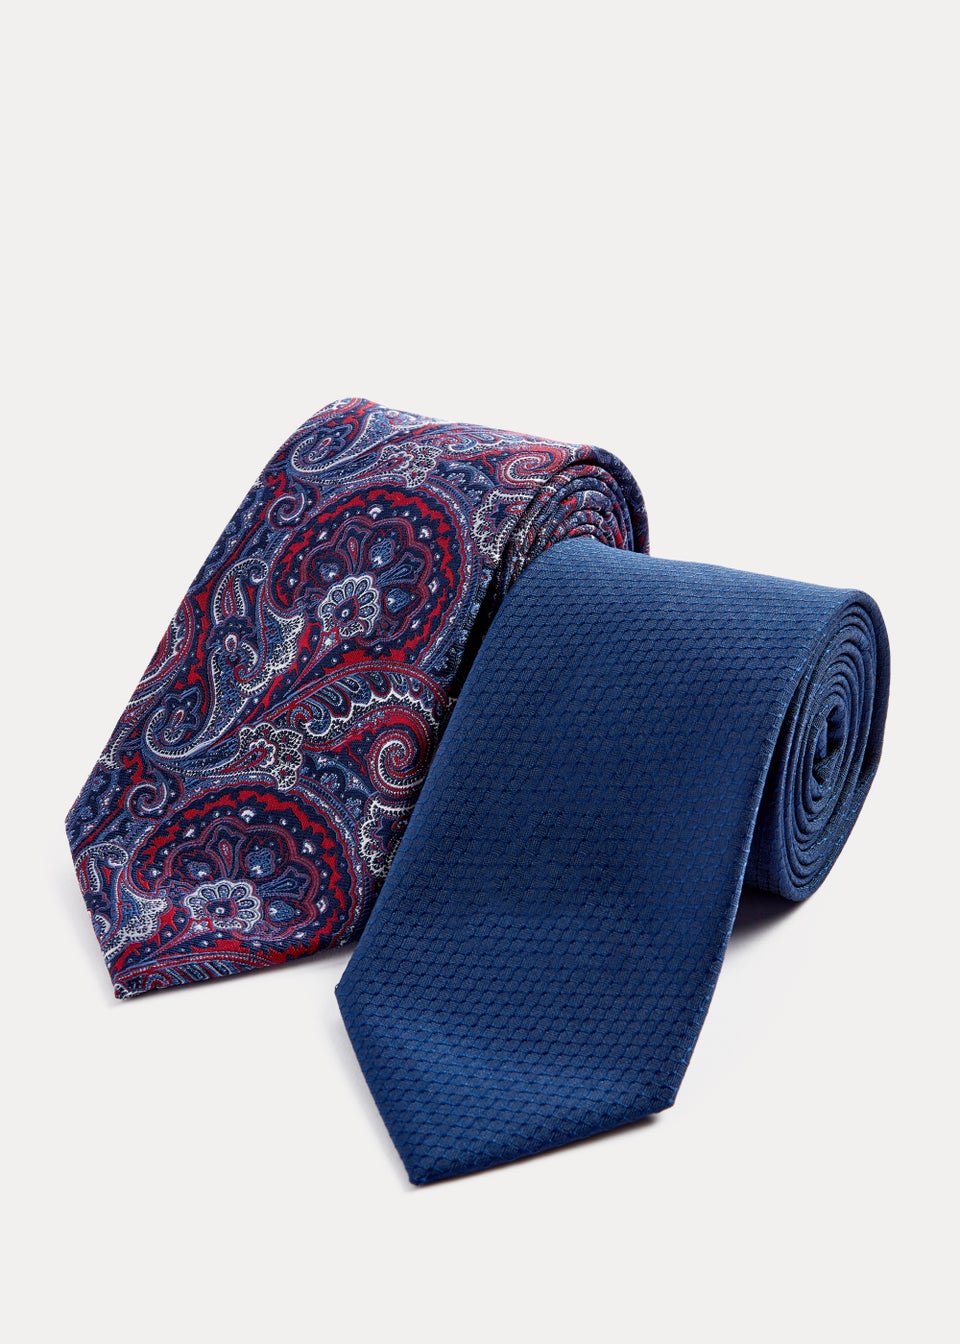 Taylor & Wright 2 Pack Navy & Red Ties